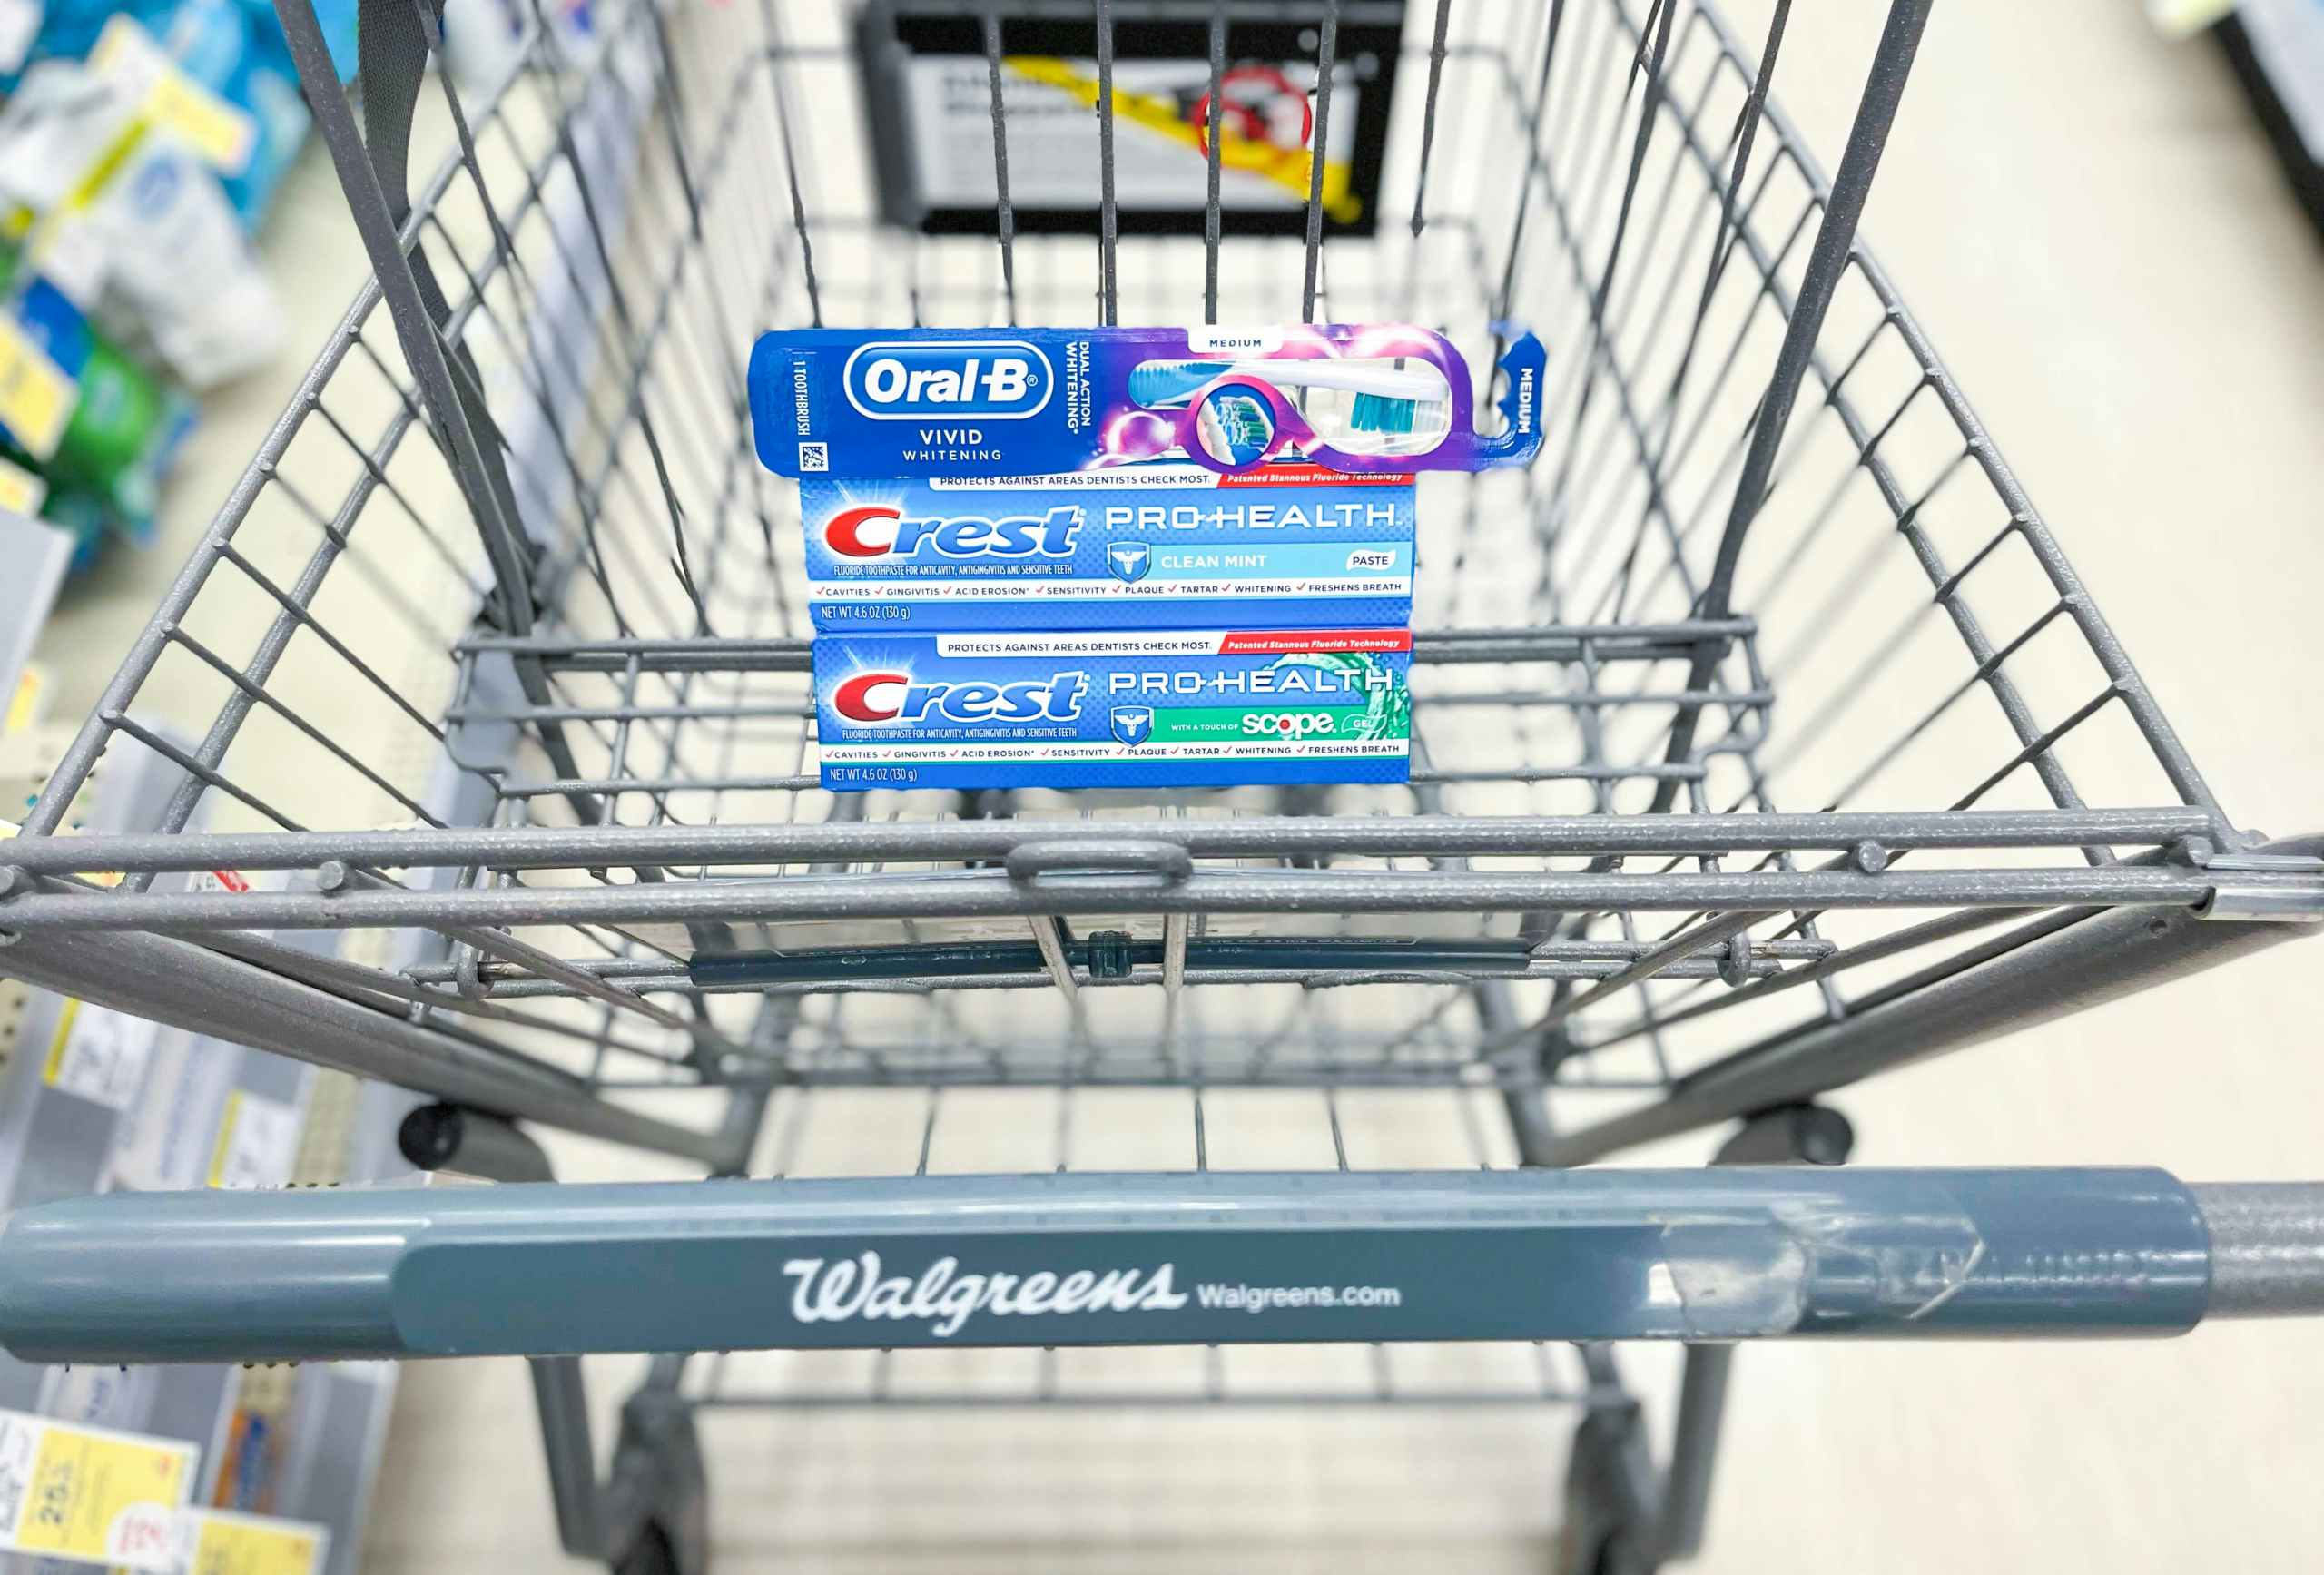 shopping cart with two tubes of Crest toothpaste and an Oral-B toothbrush